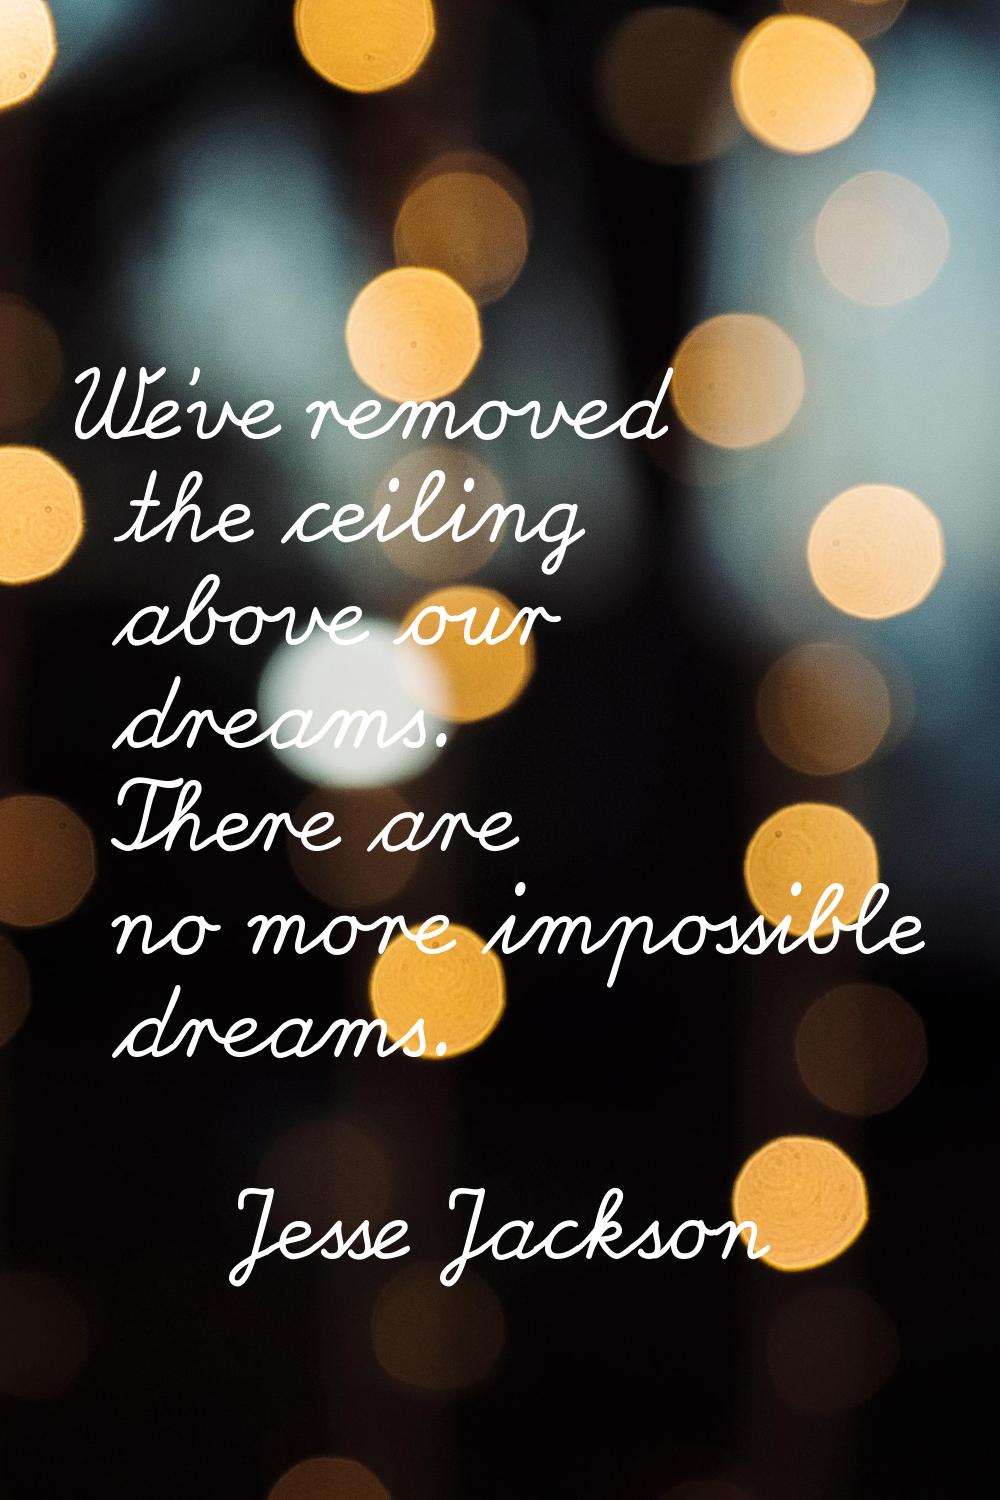 We've removed the ceiling above our dreams. There are no more impossible dreams.